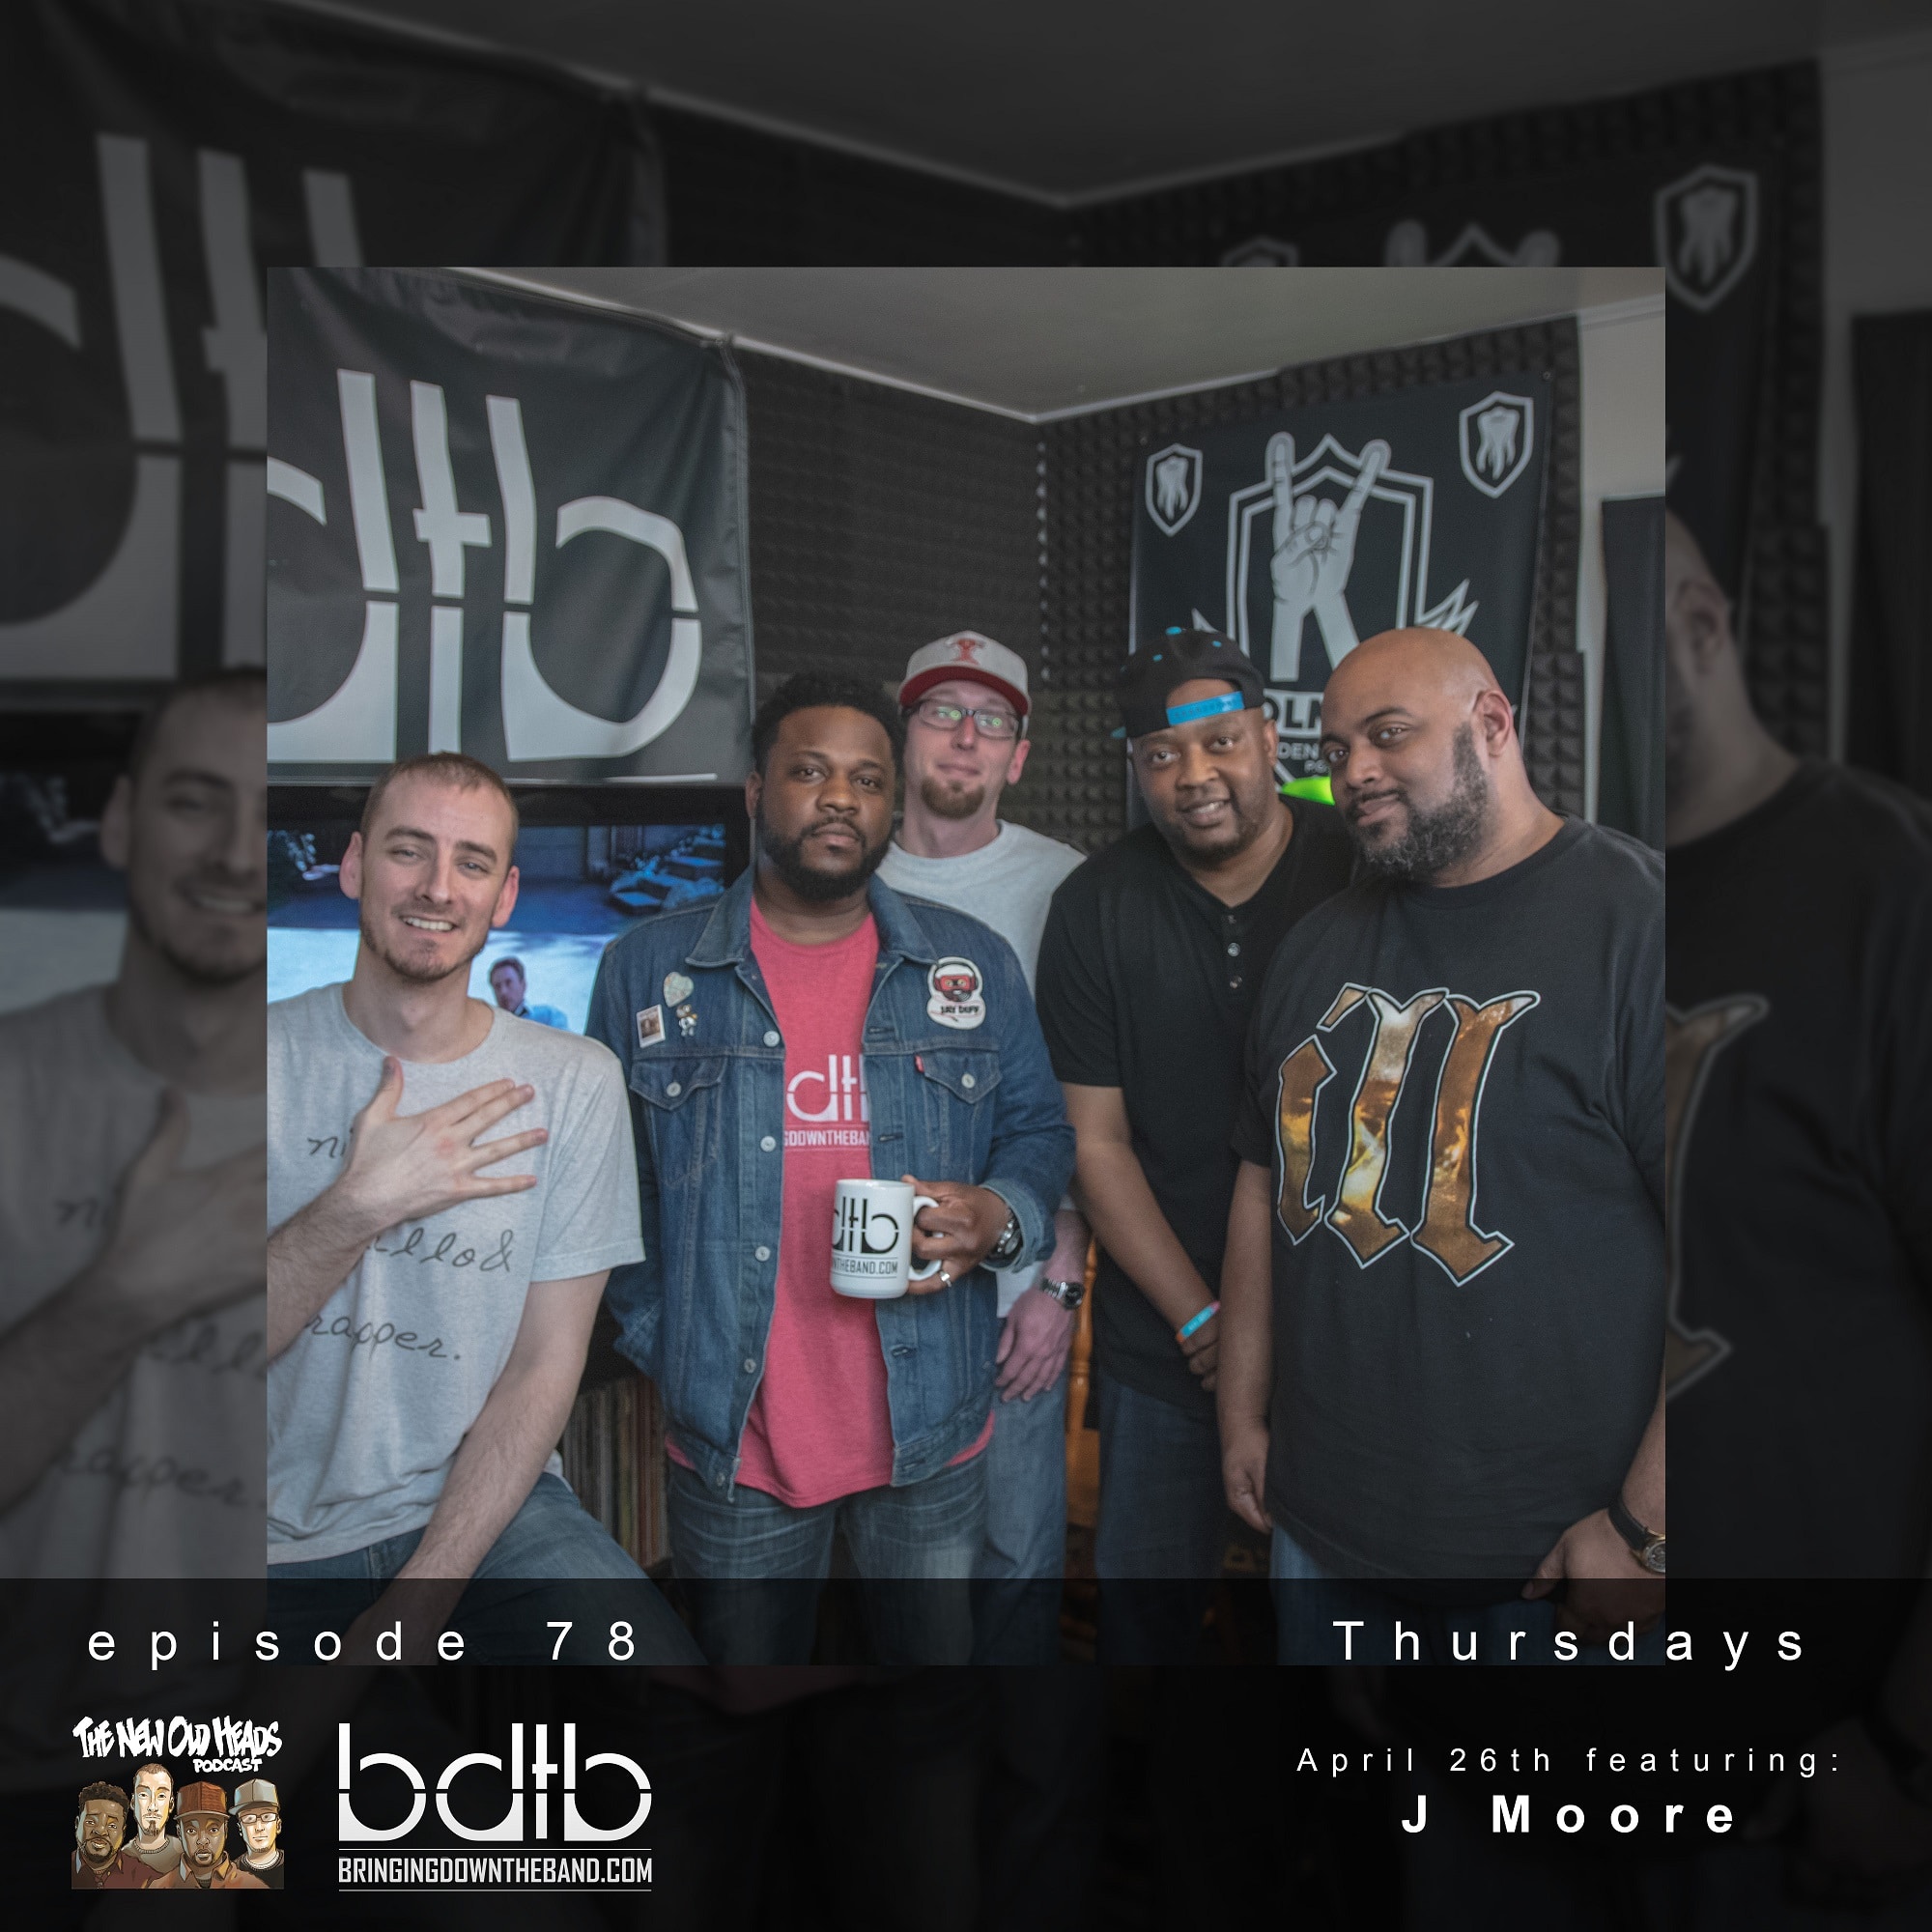 New Old Heads, Episode 78 (4/26/18) w/ J. Moore - Meek Is Free, Kanye Returns & Likes Candace Owen's Mind, J. Cole "KOD" & Lil Peep Comments, Nashville Waffle House Shooting & More